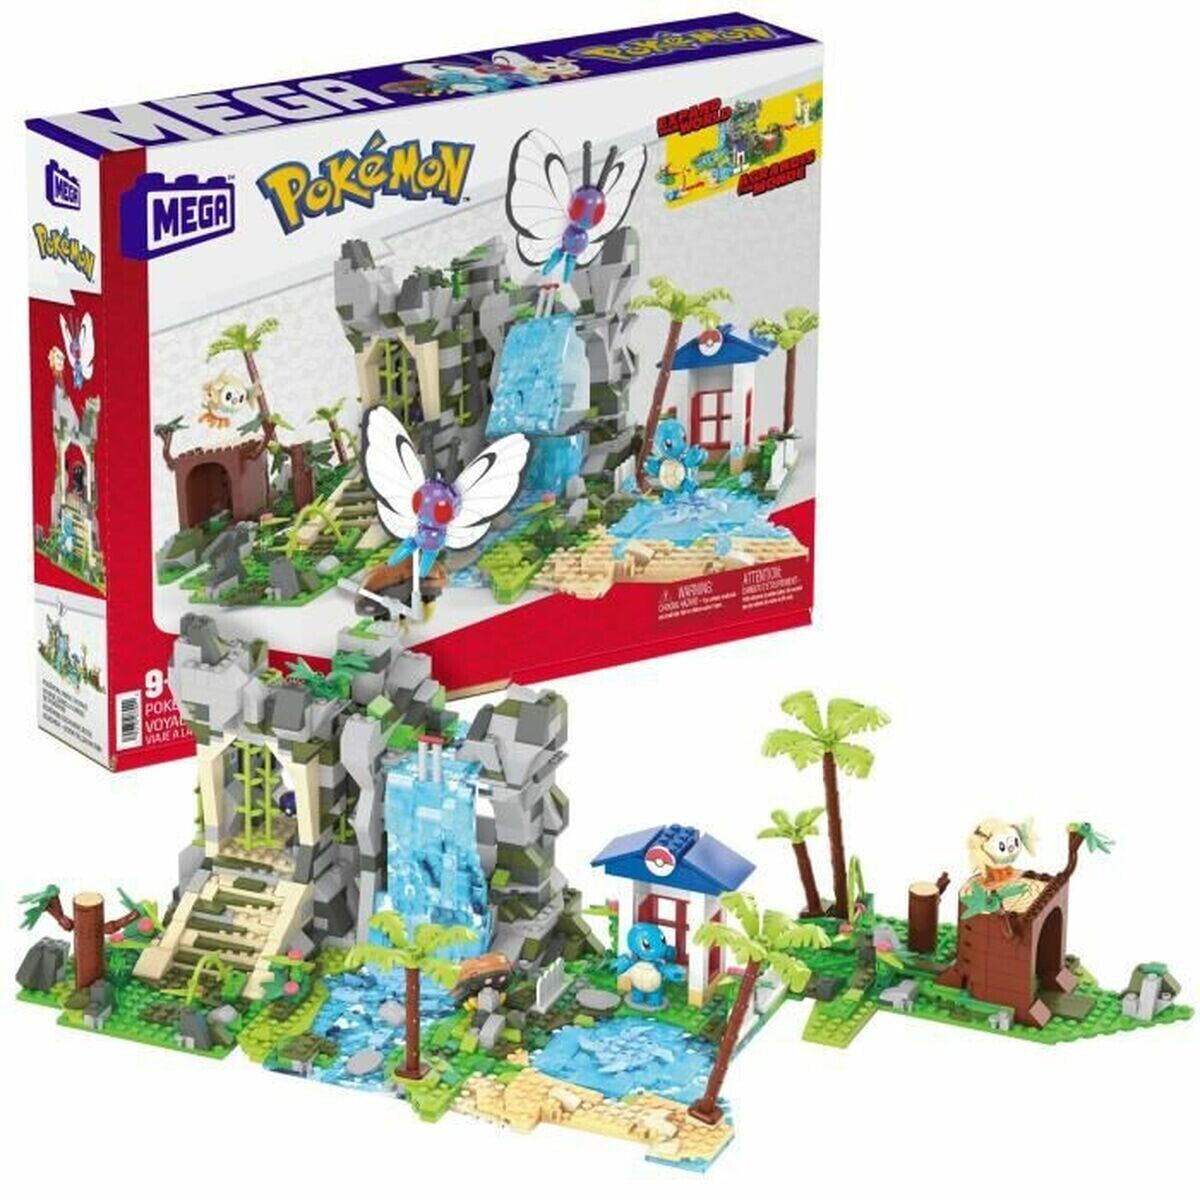 Construction set Mega Construx Expedition in the Jungle